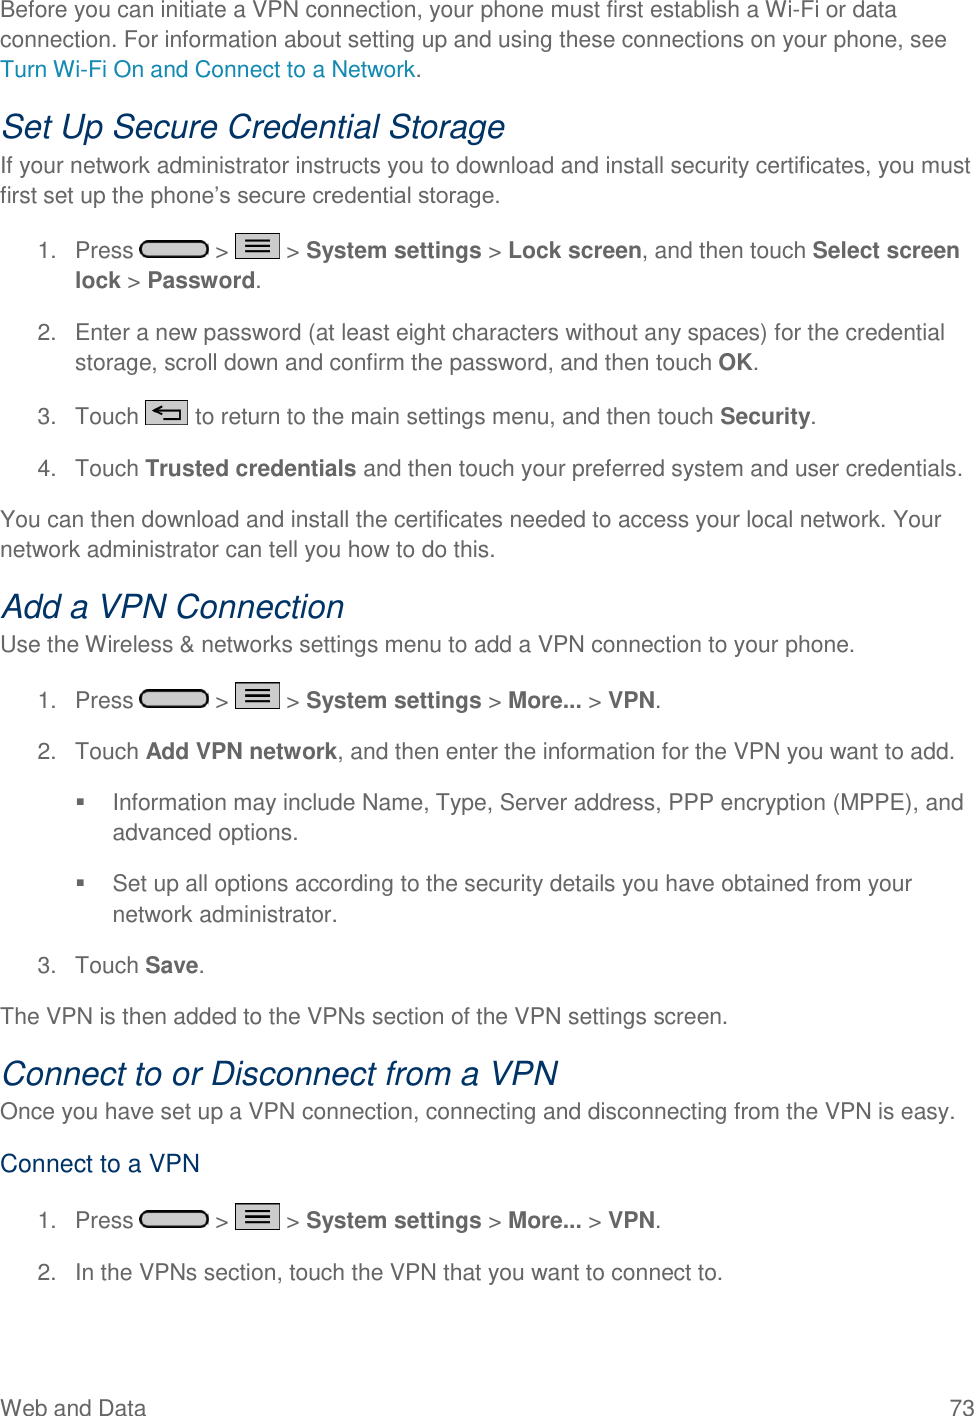 Web and Data  73 Before you can initiate a VPN connection, your phone must first establish a Wi-Fi or data connection. For information about setting up and using these connections on your phone, see Turn Wi-Fi On and Connect to a Network. Set Up Secure Credential Storage If your network administrator instructs you to download and install security certificates, you must first set up the phone‘s secure credential storage. 1.  Press   &gt;   &gt; System settings &gt; Lock screen, and then touch Select screen lock &gt; Password. 2.  Enter a new password (at least eight characters without any spaces) for the credential storage, scroll down and confirm the password, and then touch OK. 3.  Touch   to return to the main settings menu, and then touch Security. 4.  Touch Trusted credentials and then touch your preferred system and user credentials. You can then download and install the certificates needed to access your local network. Your network administrator can tell you how to do this. Add a VPN Connection Use the Wireless &amp; networks settings menu to add a VPN connection to your phone. 1.  Press   &gt;   &gt; System settings &gt; More... &gt; VPN. 2.  Touch Add VPN network, and then enter the information for the VPN you want to add.   Information may include Name, Type, Server address, PPP encryption (MPPE), and advanced options.   Set up all options according to the security details you have obtained from your network administrator. 3.  Touch Save. The VPN is then added to the VPNs section of the VPN settings screen. Connect to or Disconnect from a VPN Once you have set up a VPN connection, connecting and disconnecting from the VPN is easy. Connect to a VPN 1.  Press   &gt;   &gt; System settings &gt; More... &gt; VPN. 2.  In the VPNs section, touch the VPN that you want to connect to. 